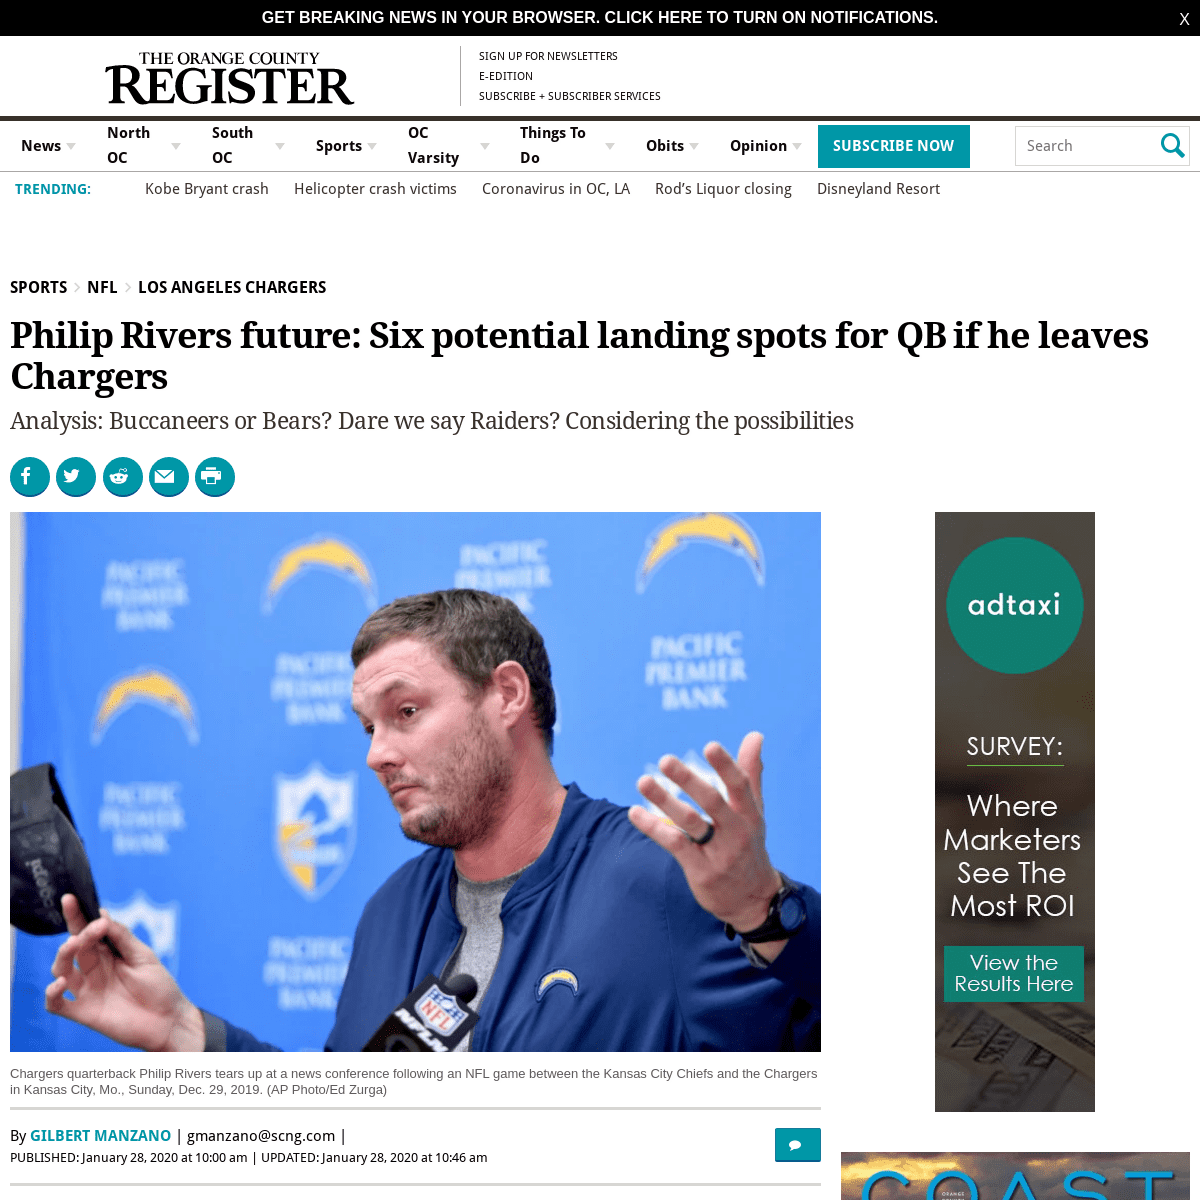 A complete backup of www.ocregister.com/philip-rivers-future-six-potential-landing-spots-for-qb-if-he-leaves-chargers